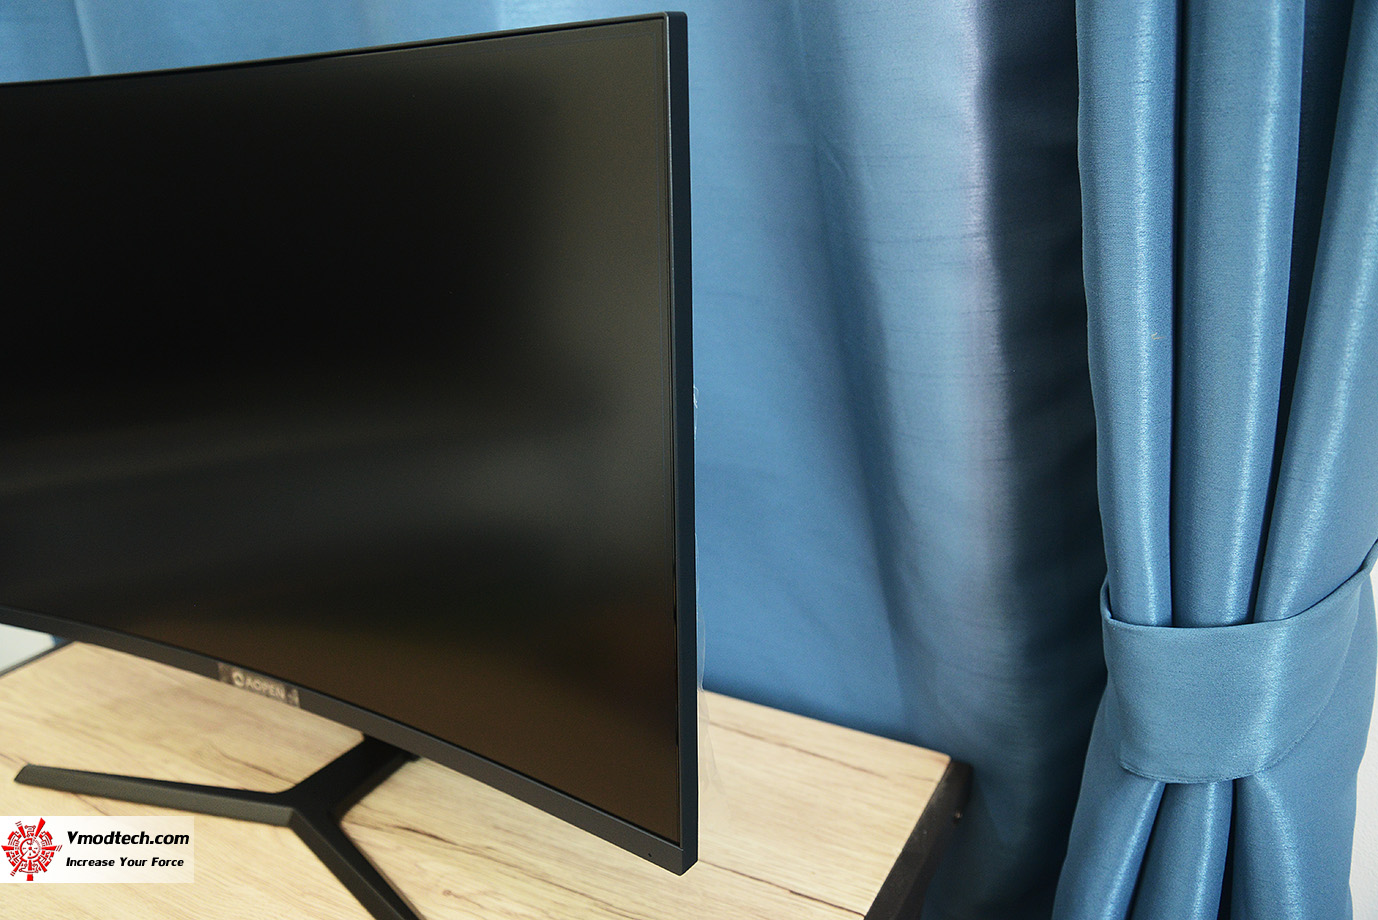 dsc 7032 AOPEN LED 27” HC1 Series 27HC1RPbidpx Curve Screen GAMING MONITOR 144Hz Review